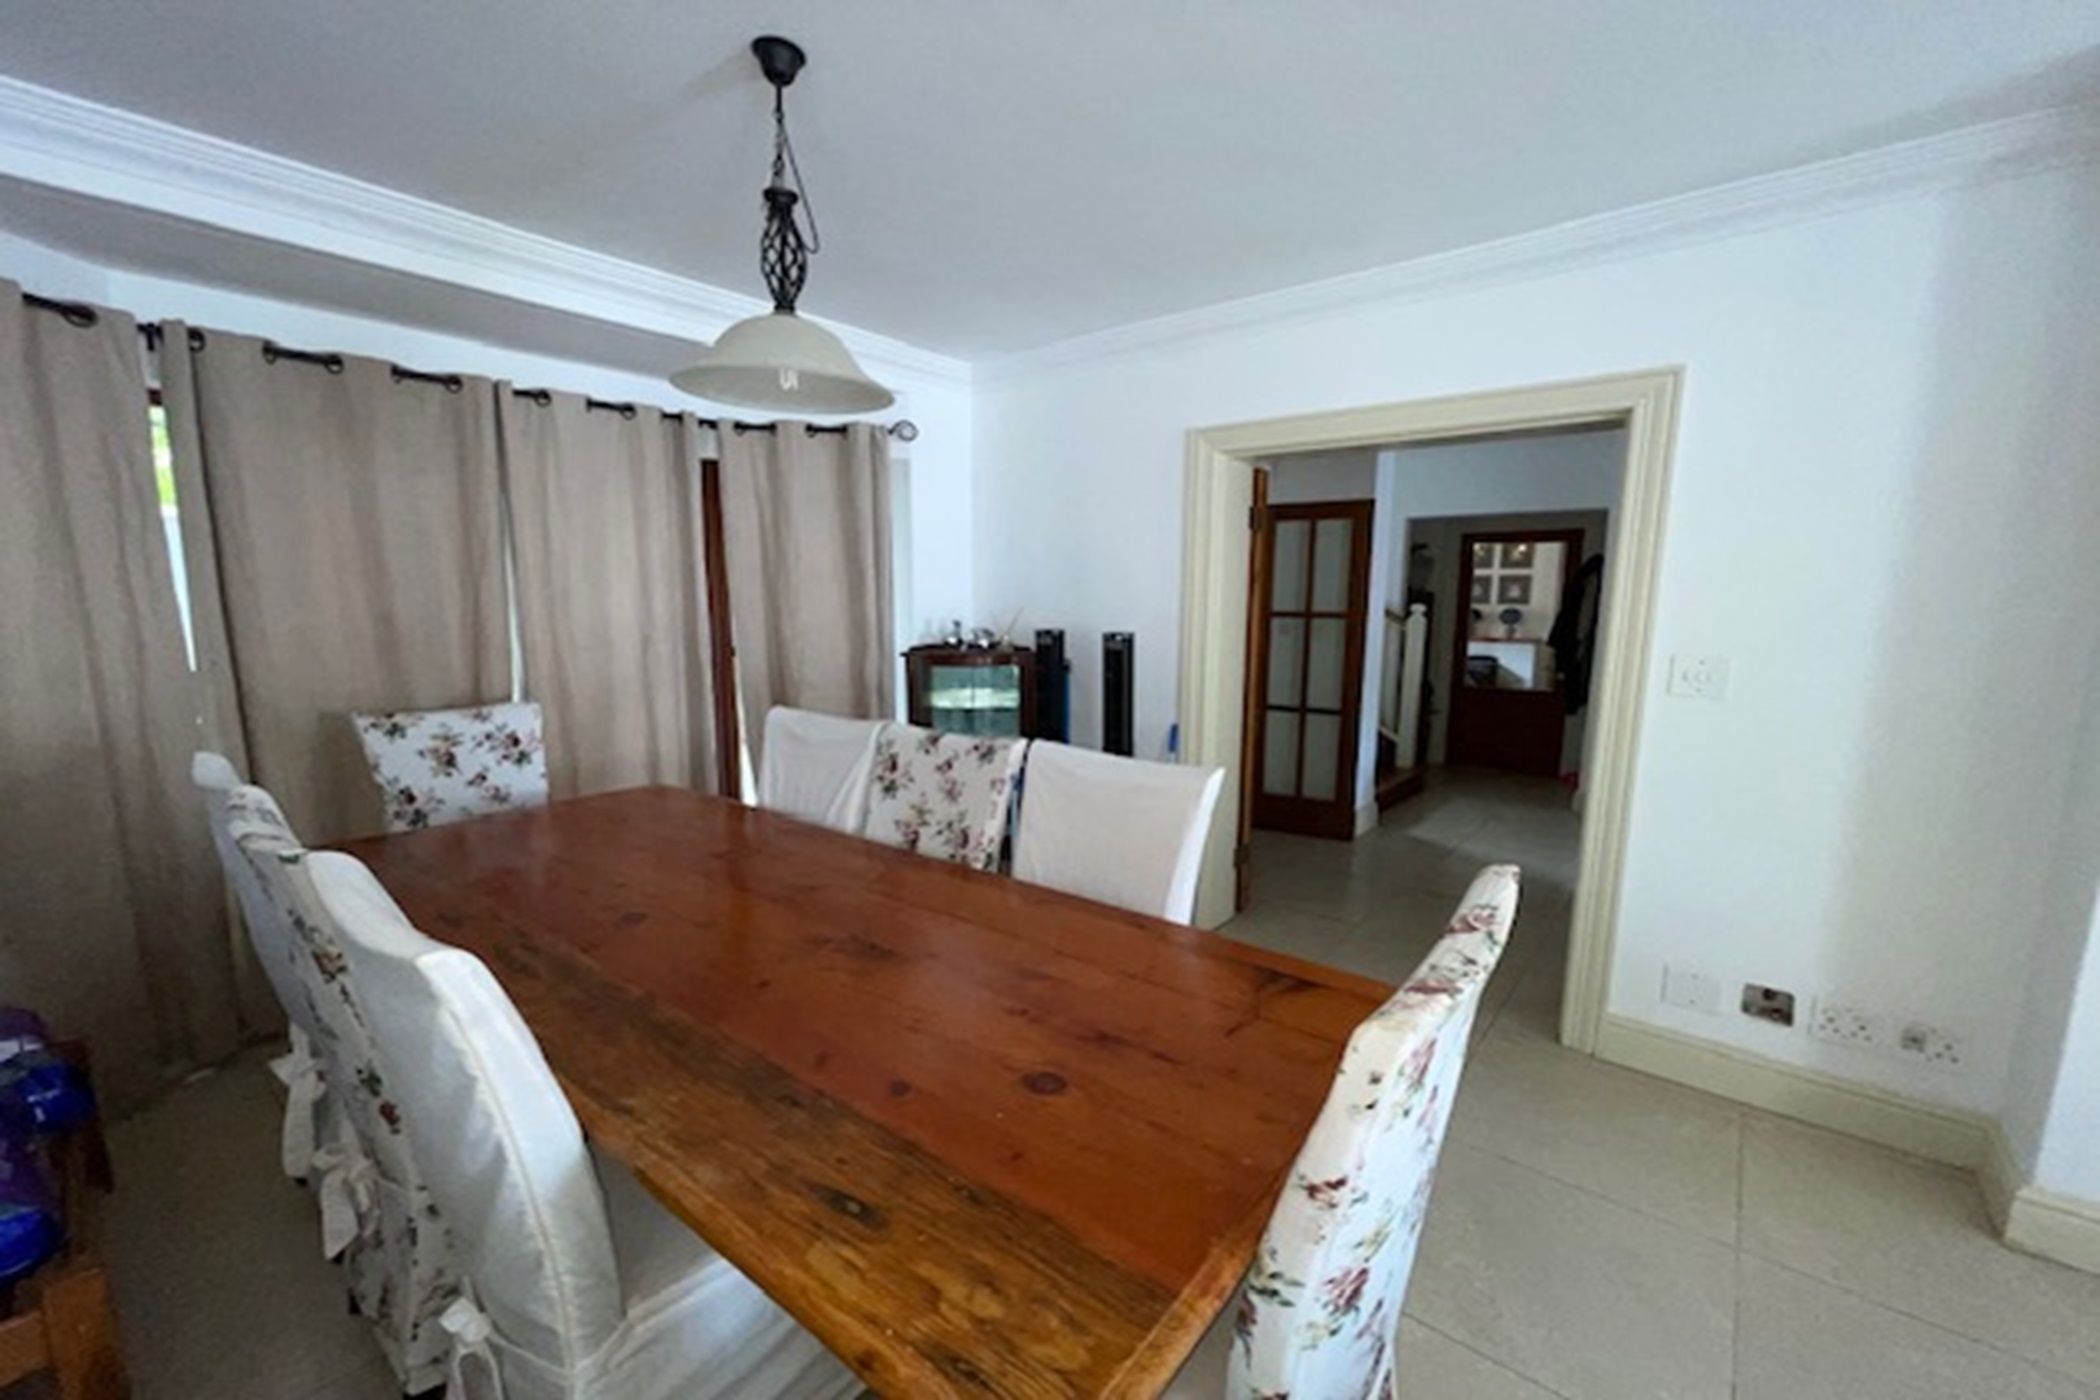 4 bedroom house to rent in Newlands (Cape Town)